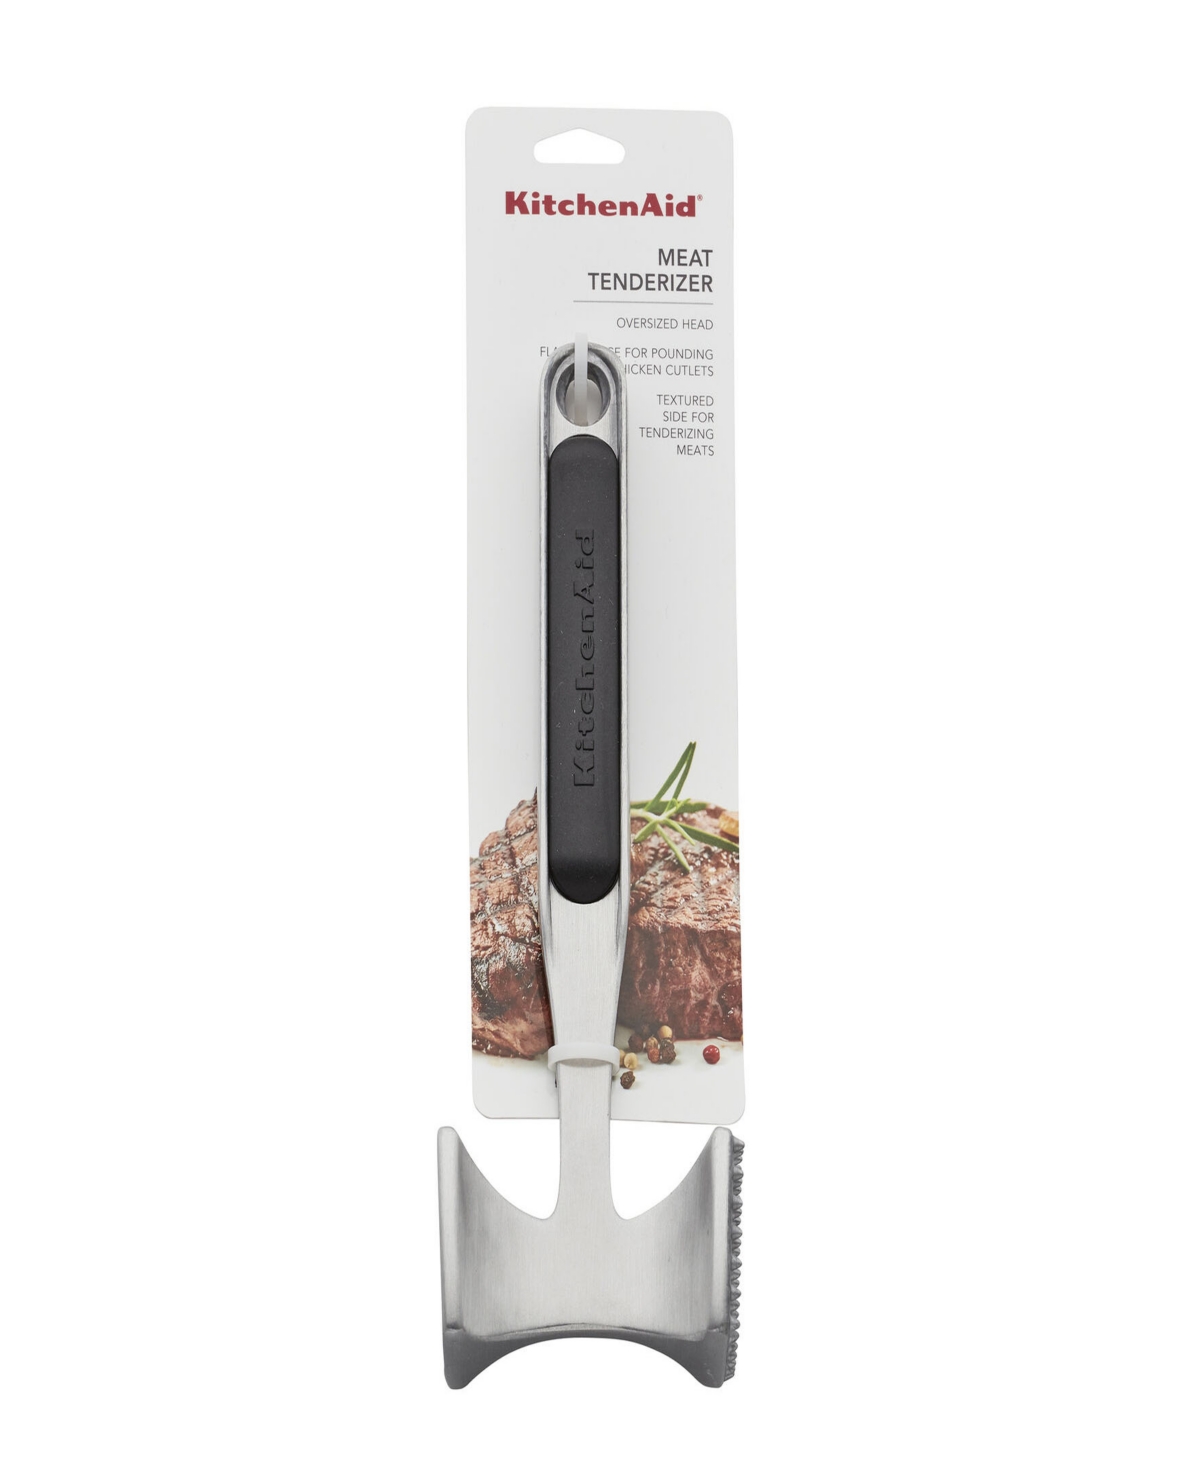 Kitchenaid Gourmet Meat Tenderizer, One Size In No Color